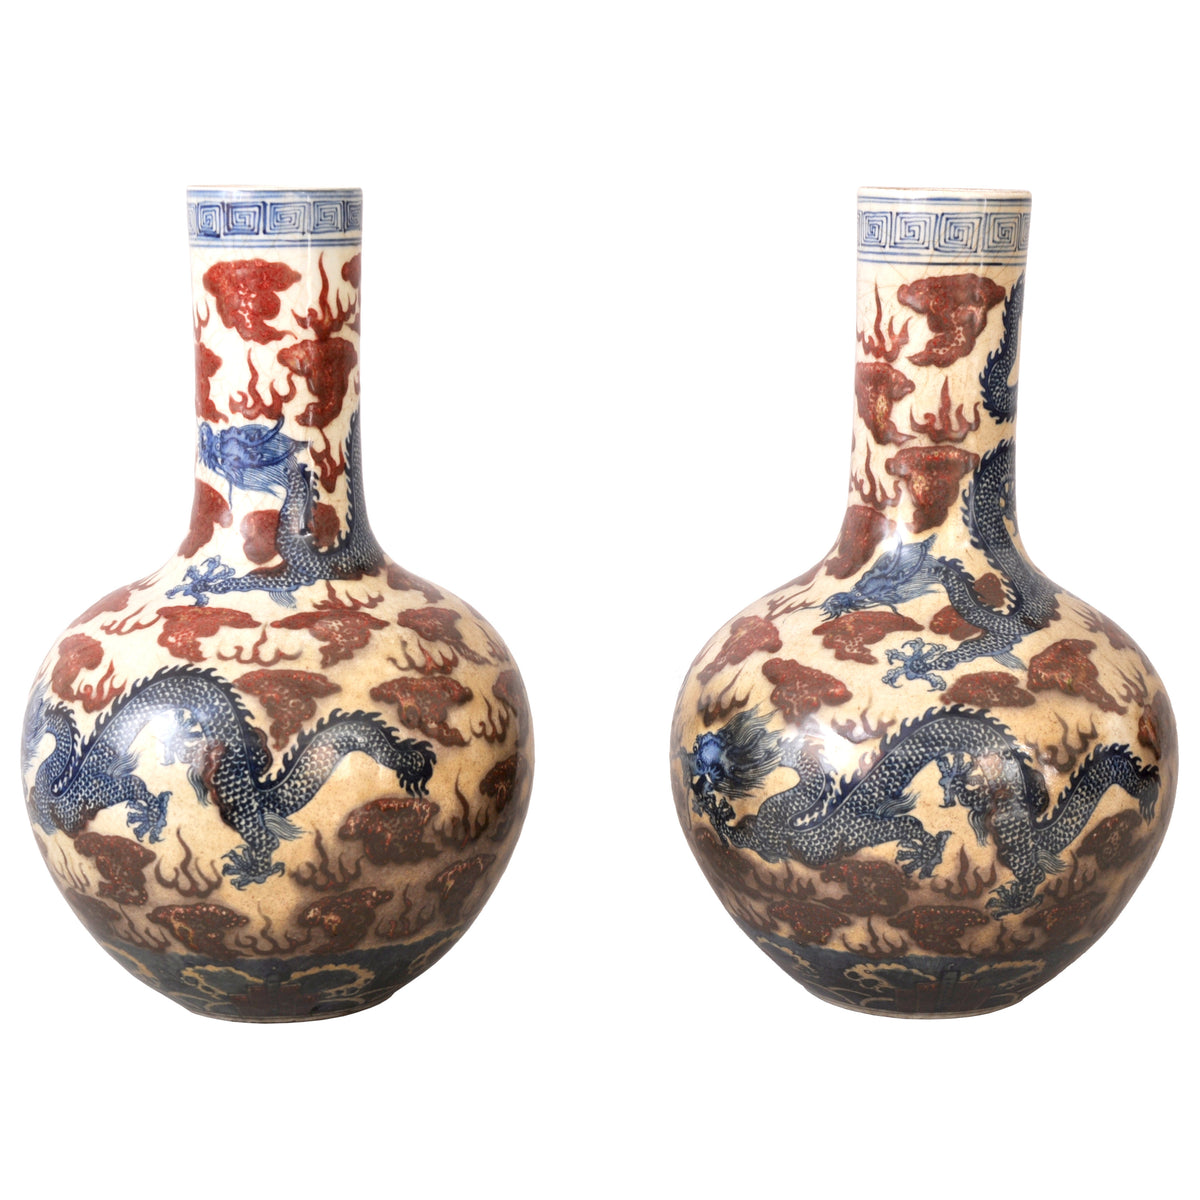 Pair of Large Antique Chinese Qing Dynasty Porcelain Blue & White Dragon Vases, circa 1880